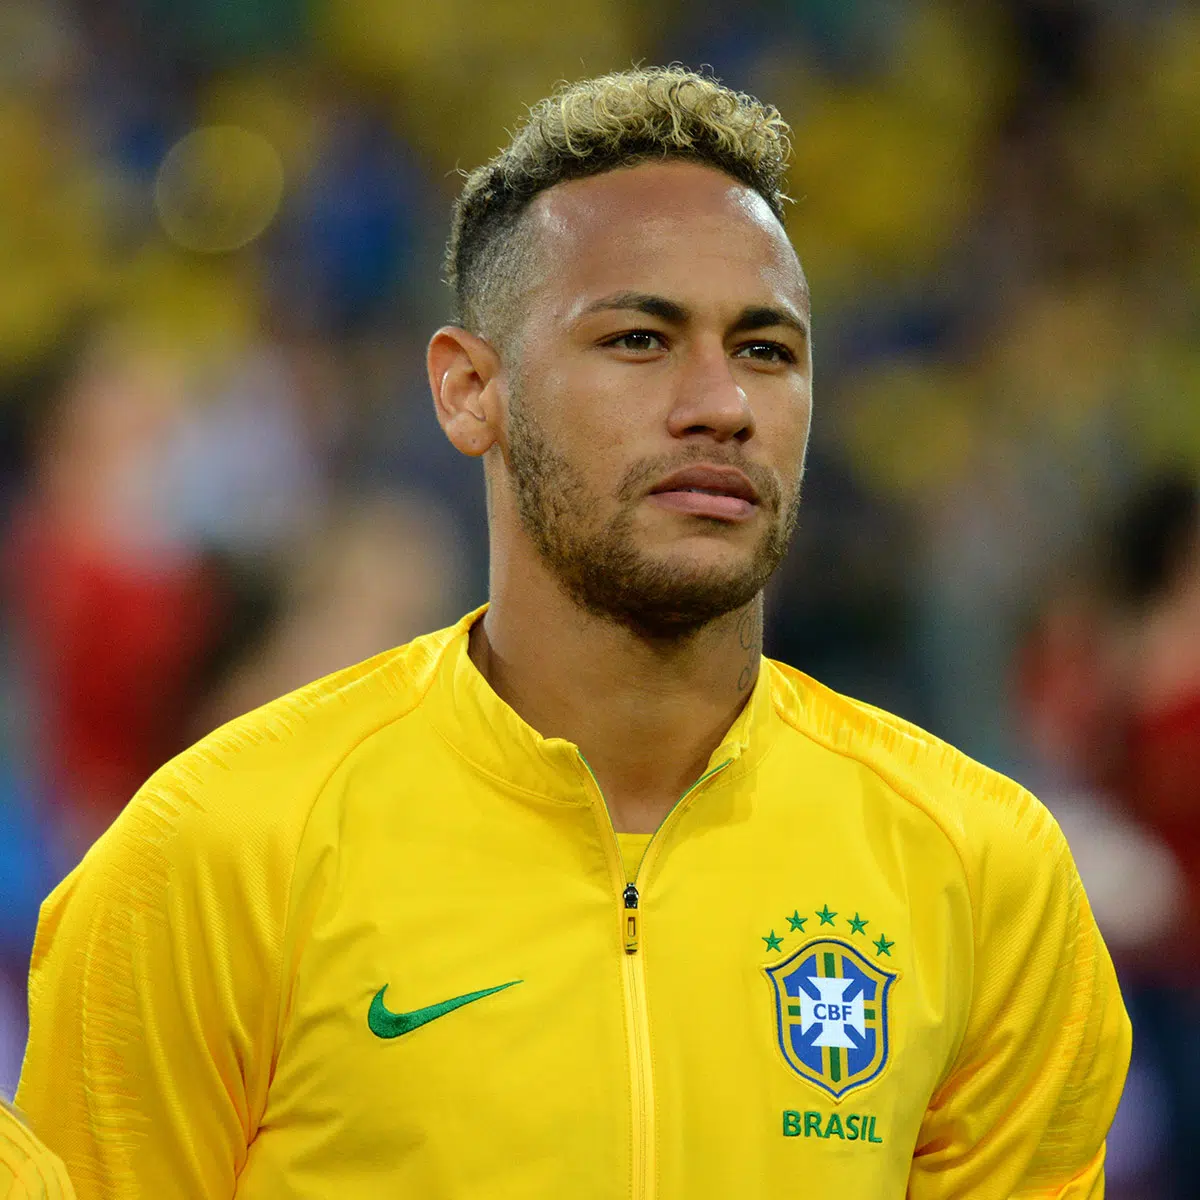 30-year-old Leaves His Property for Neymar to Inherit